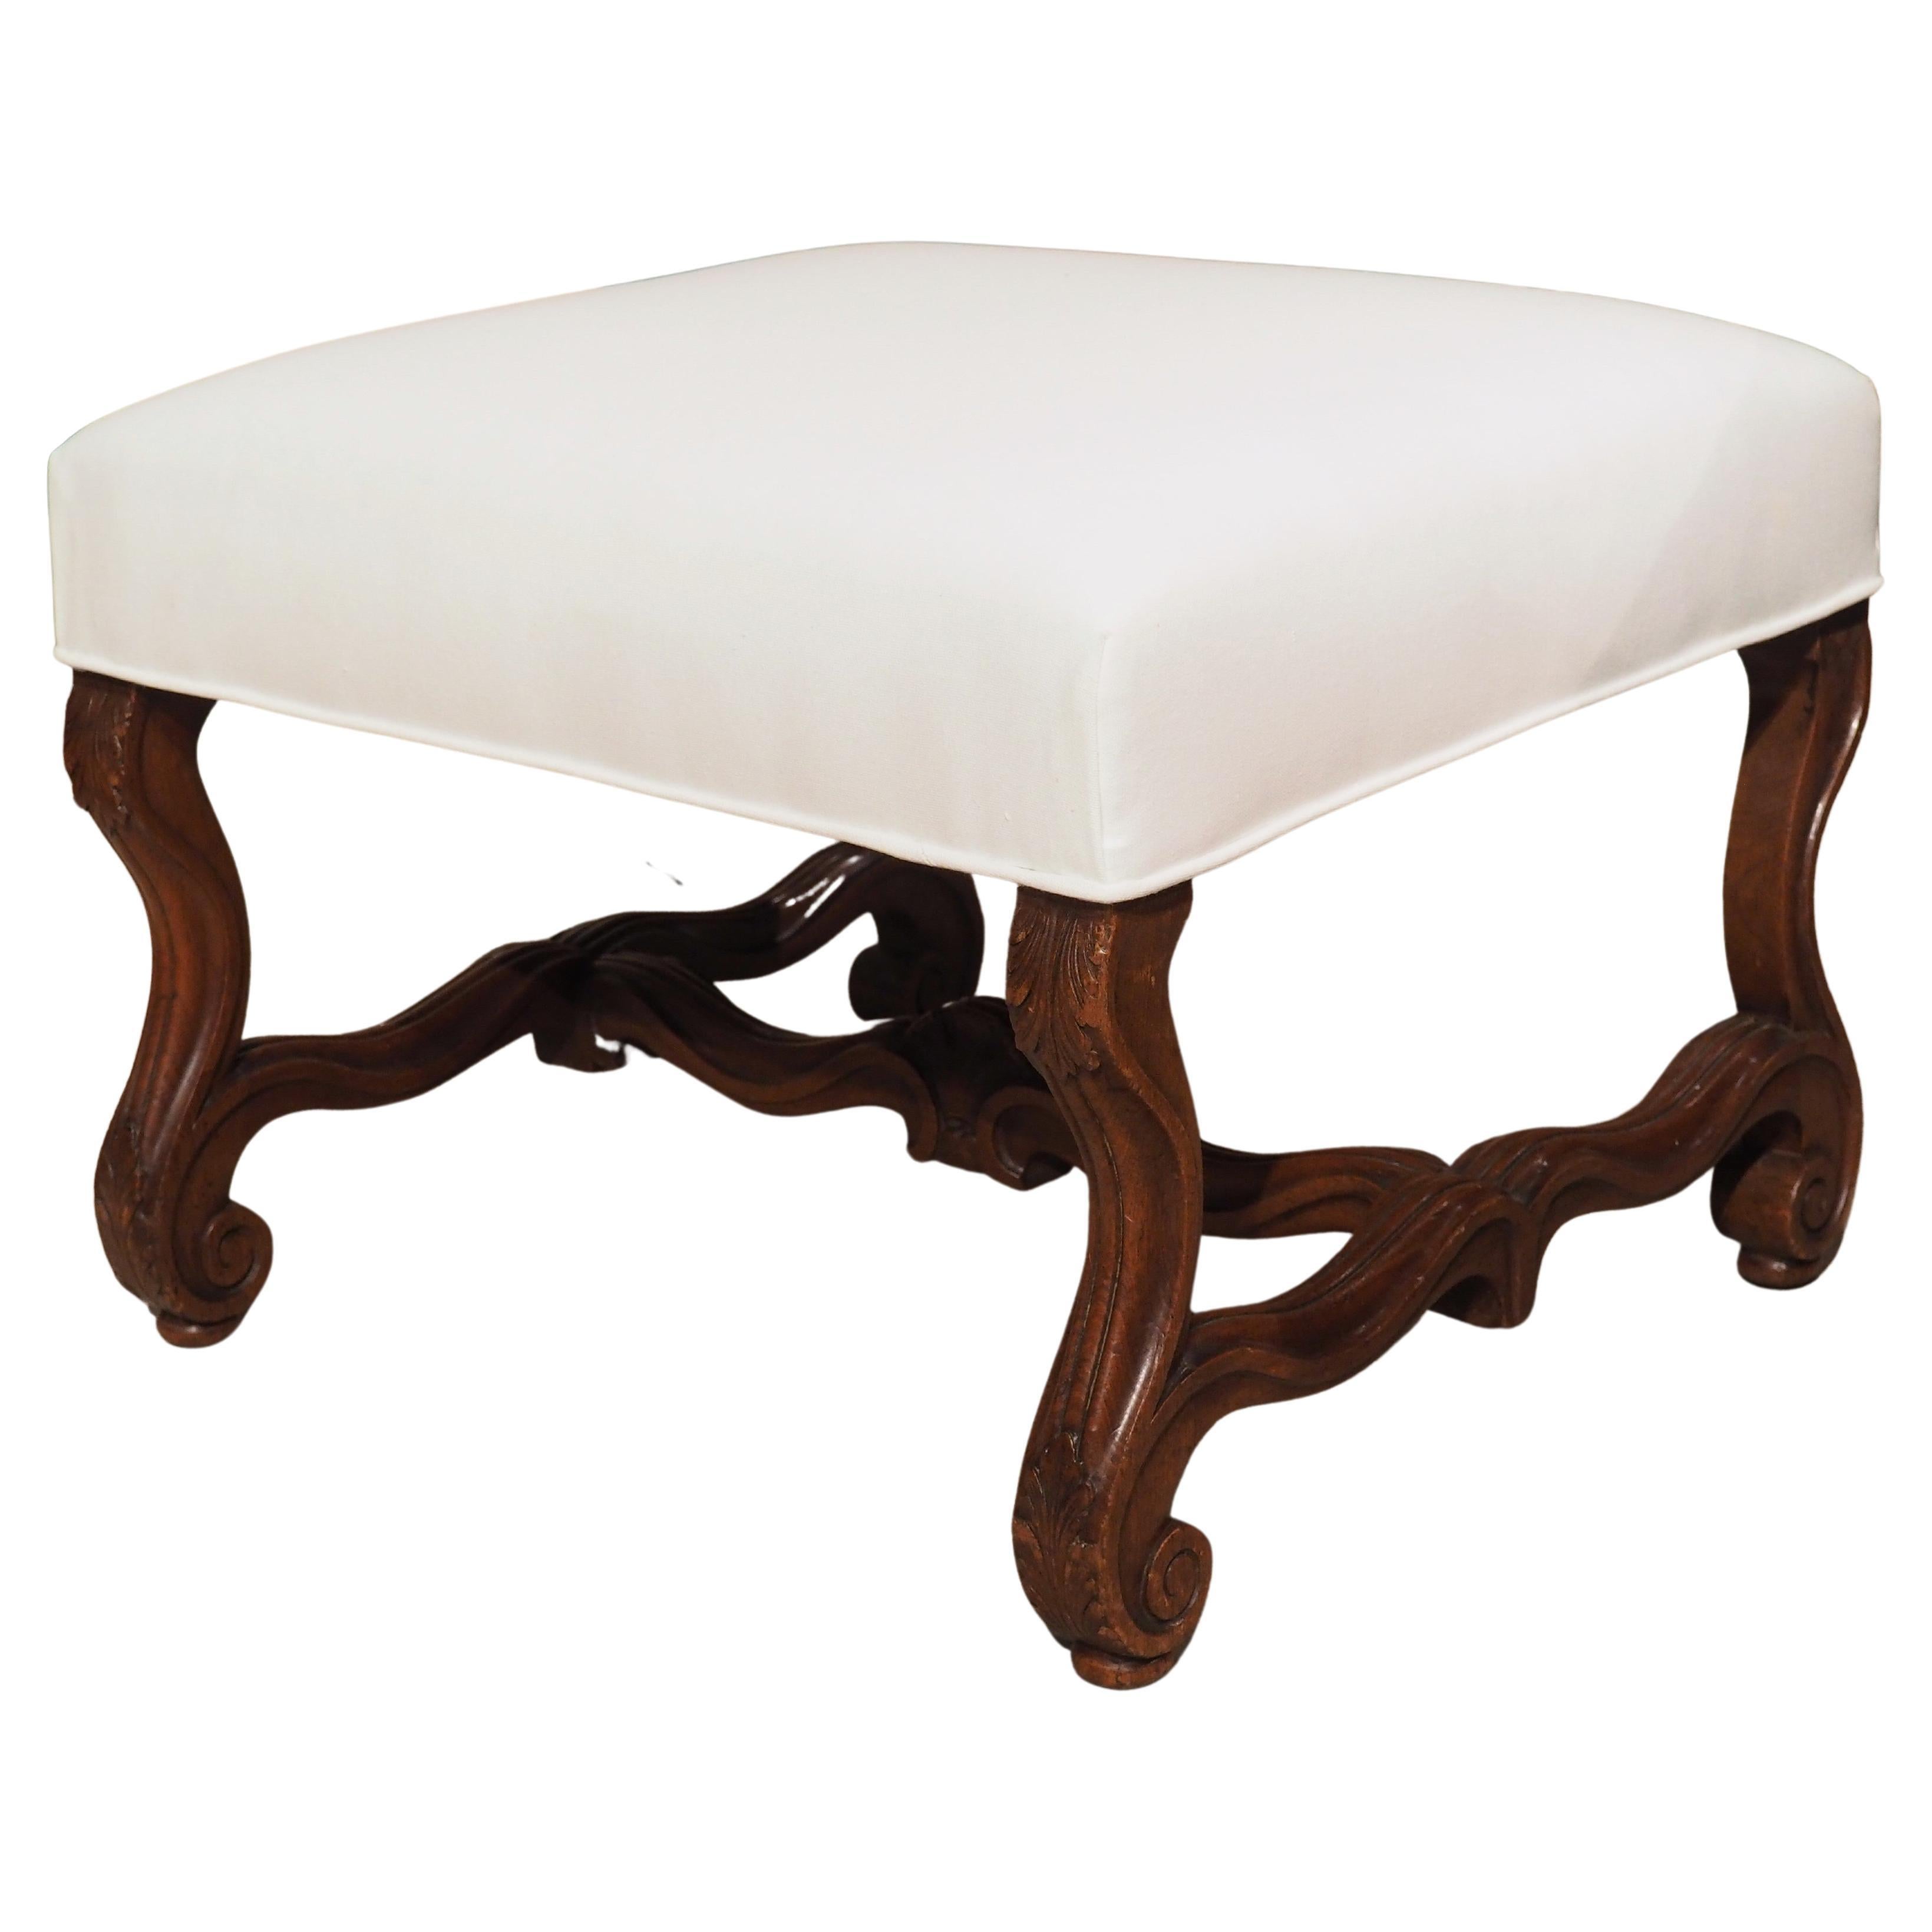 Antique French Walnut Os De Mouton Tabouret Stool, Early 1900s